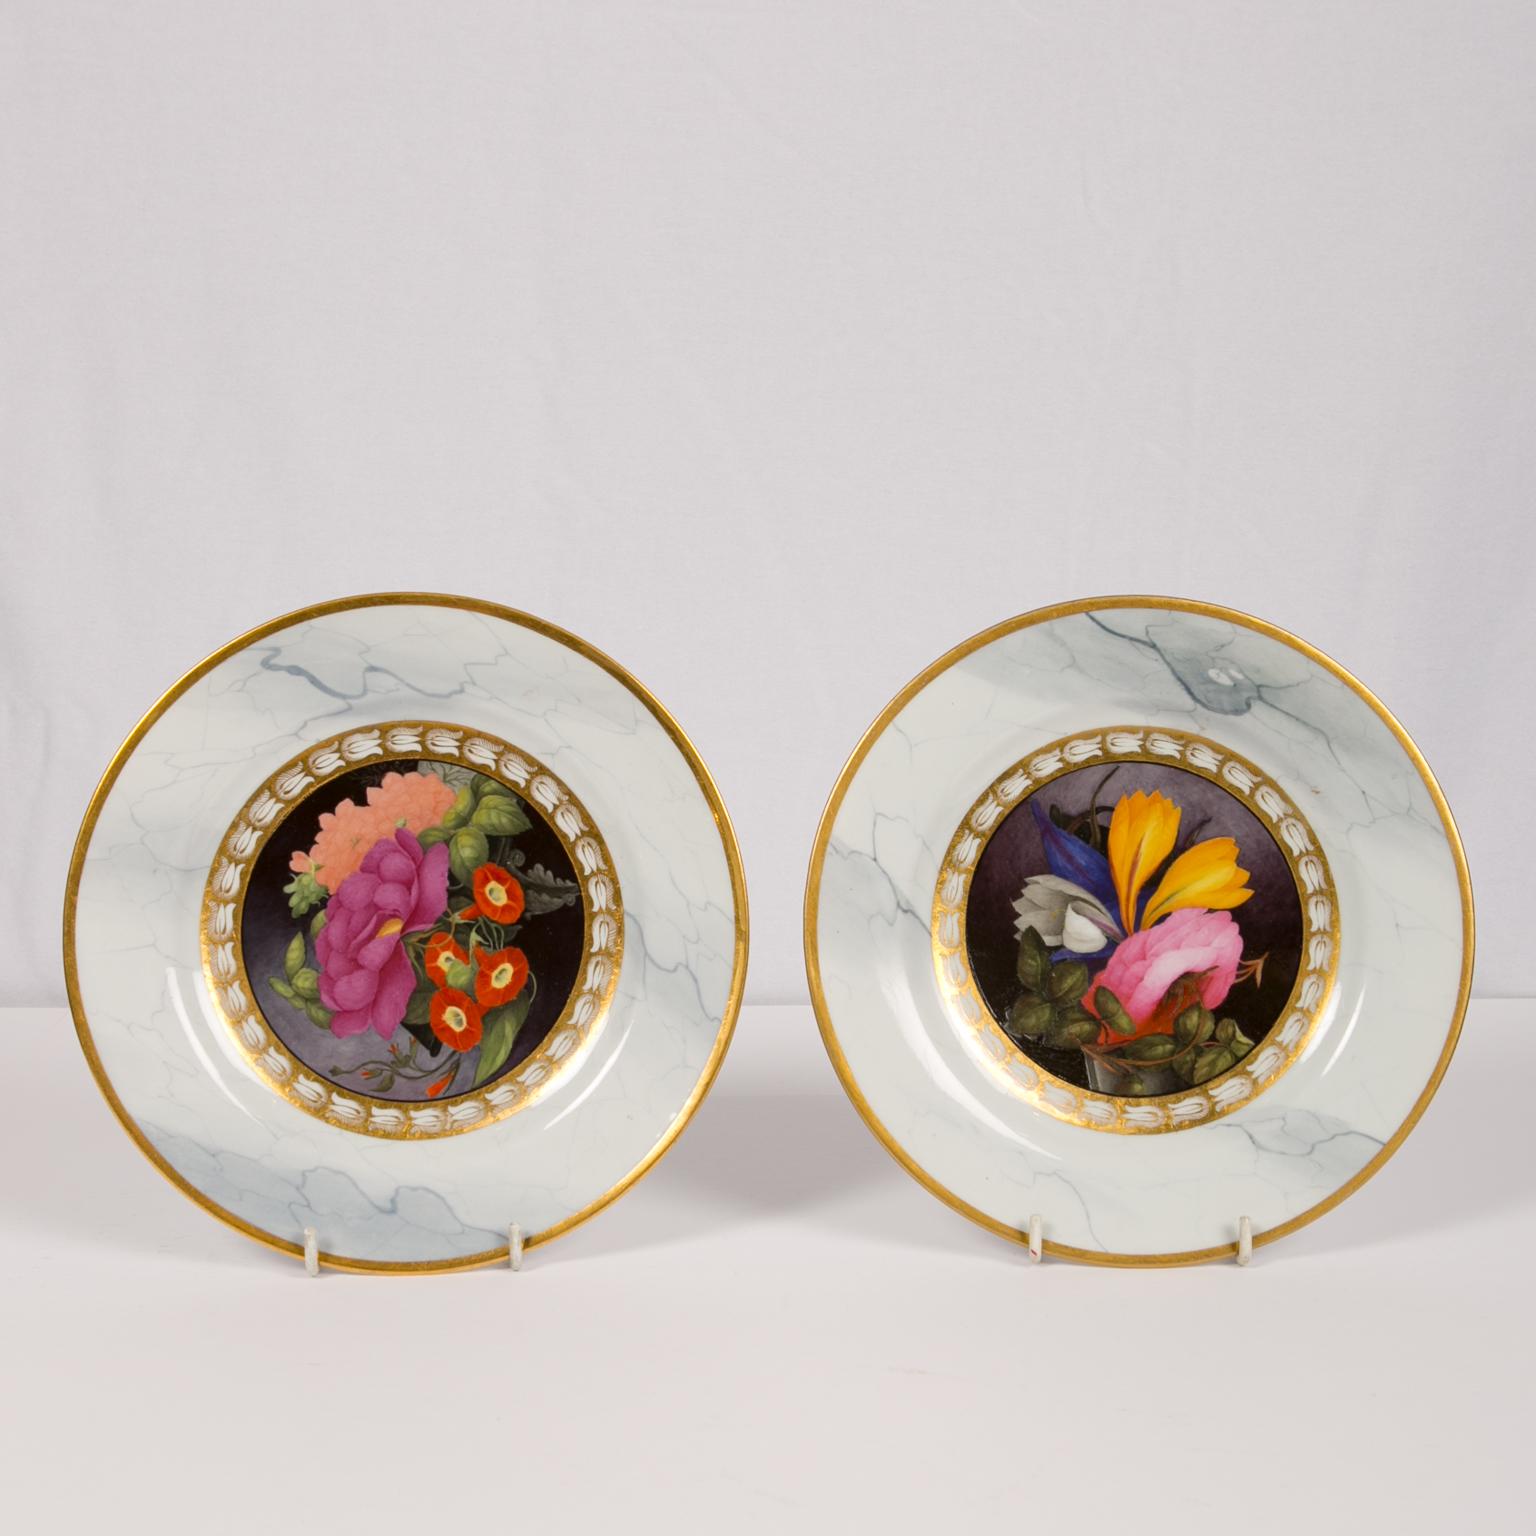 Porcelain Pair of Worcester Marbled Plates with Flowers Made in England Circa 1810 For Sale